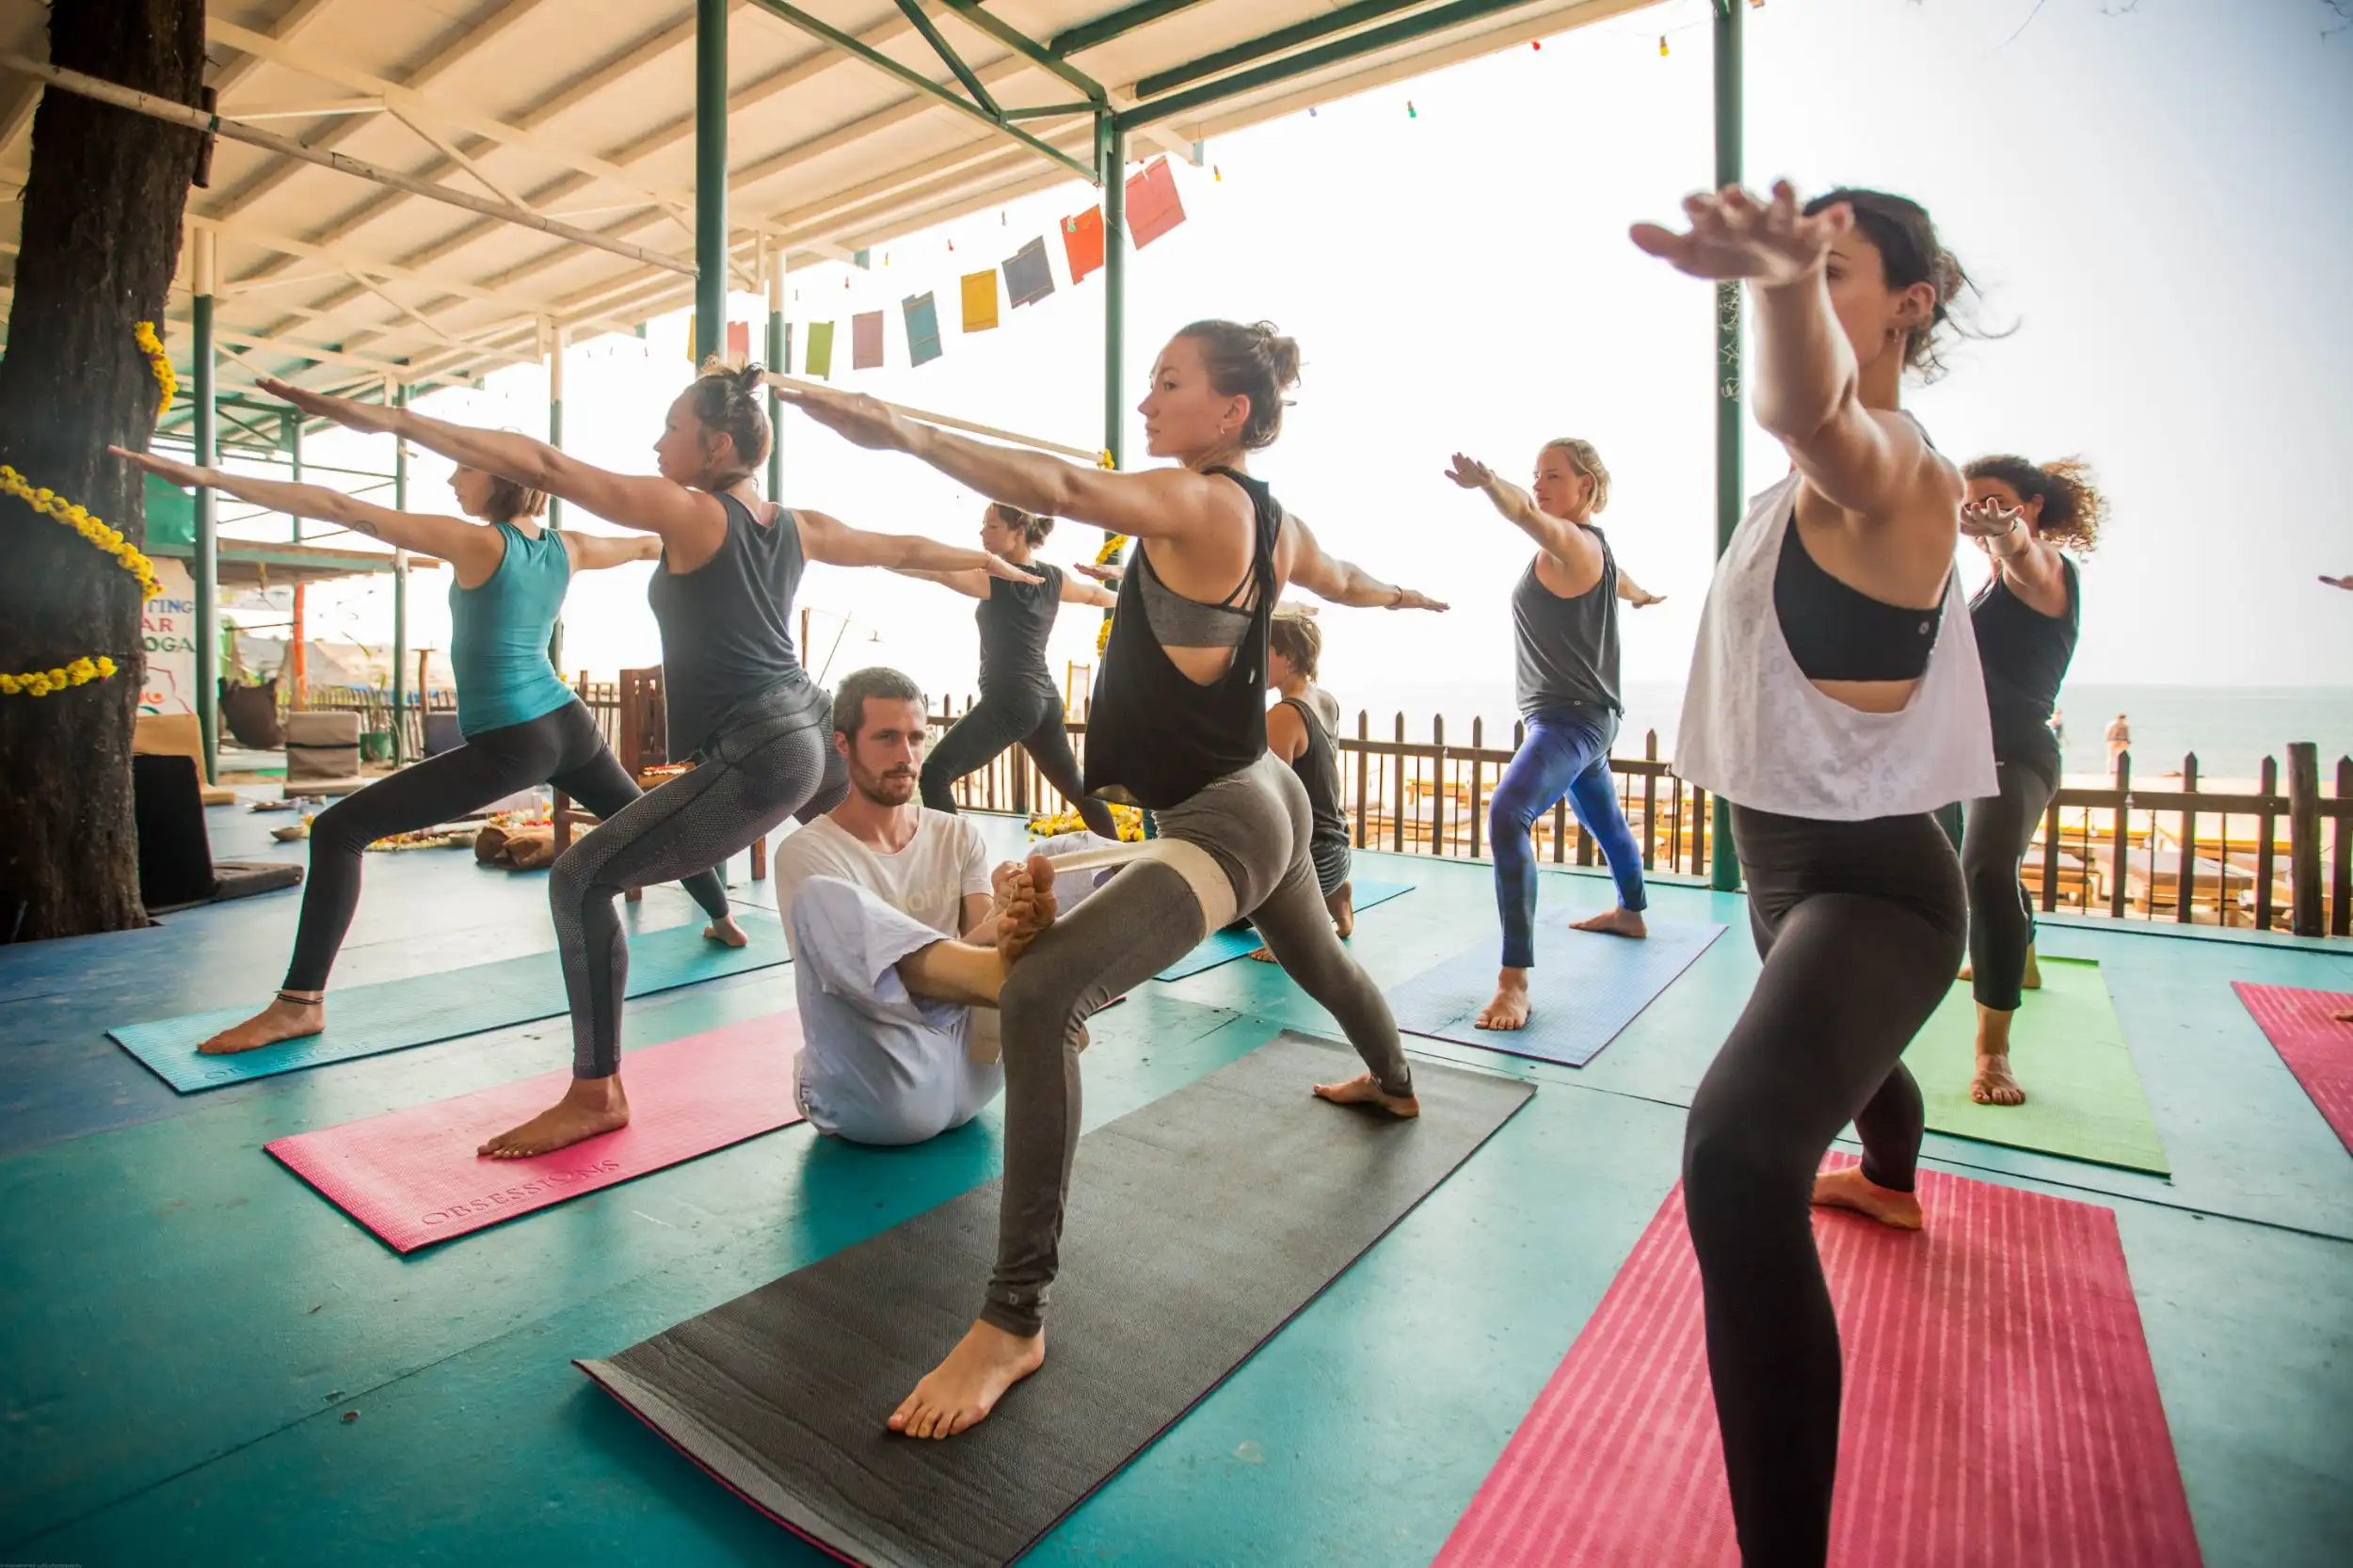 Group of people practicing yoga outdoors in a large area, Yoga TTC Goa.